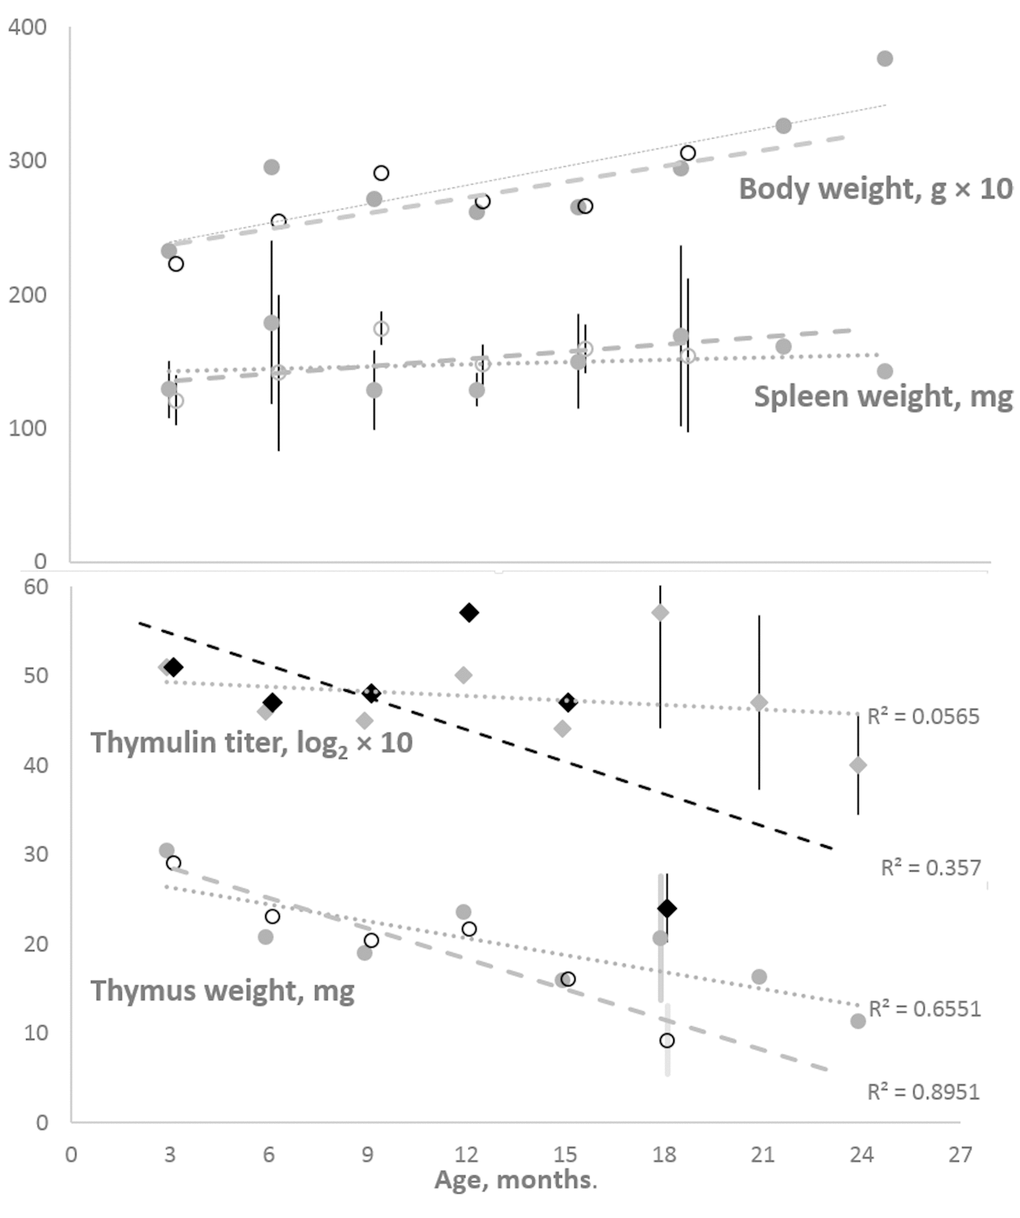 Body and spleen weights (the upper panel) and thymus weight and serum thymulin titer (the lower panel) in the cohorts of female K14/mIGF1 and WT FVB/N mice. Body weight and thymulin titer data are multiplied by 10 to better accommodate all data to the respective panels. To avoid encumbering, shown are only the 95% confidence intervals that suggest significant differences between K14/mIGF1 and WT FVB/N mice (the lower panel) and the lack of significant differences in the spleen weights of the two strains (the upper panel). K14/mIGF1 mice are presented with dashed lines and open markers, except for thymulin data markers (filled black diamonds). FVB/N mice are presented with dotted lines and filled gray markers. No comparison between K14/mIGF1 and FVB/N data are possible after ages above 18 months because the former mice do not live thus long.